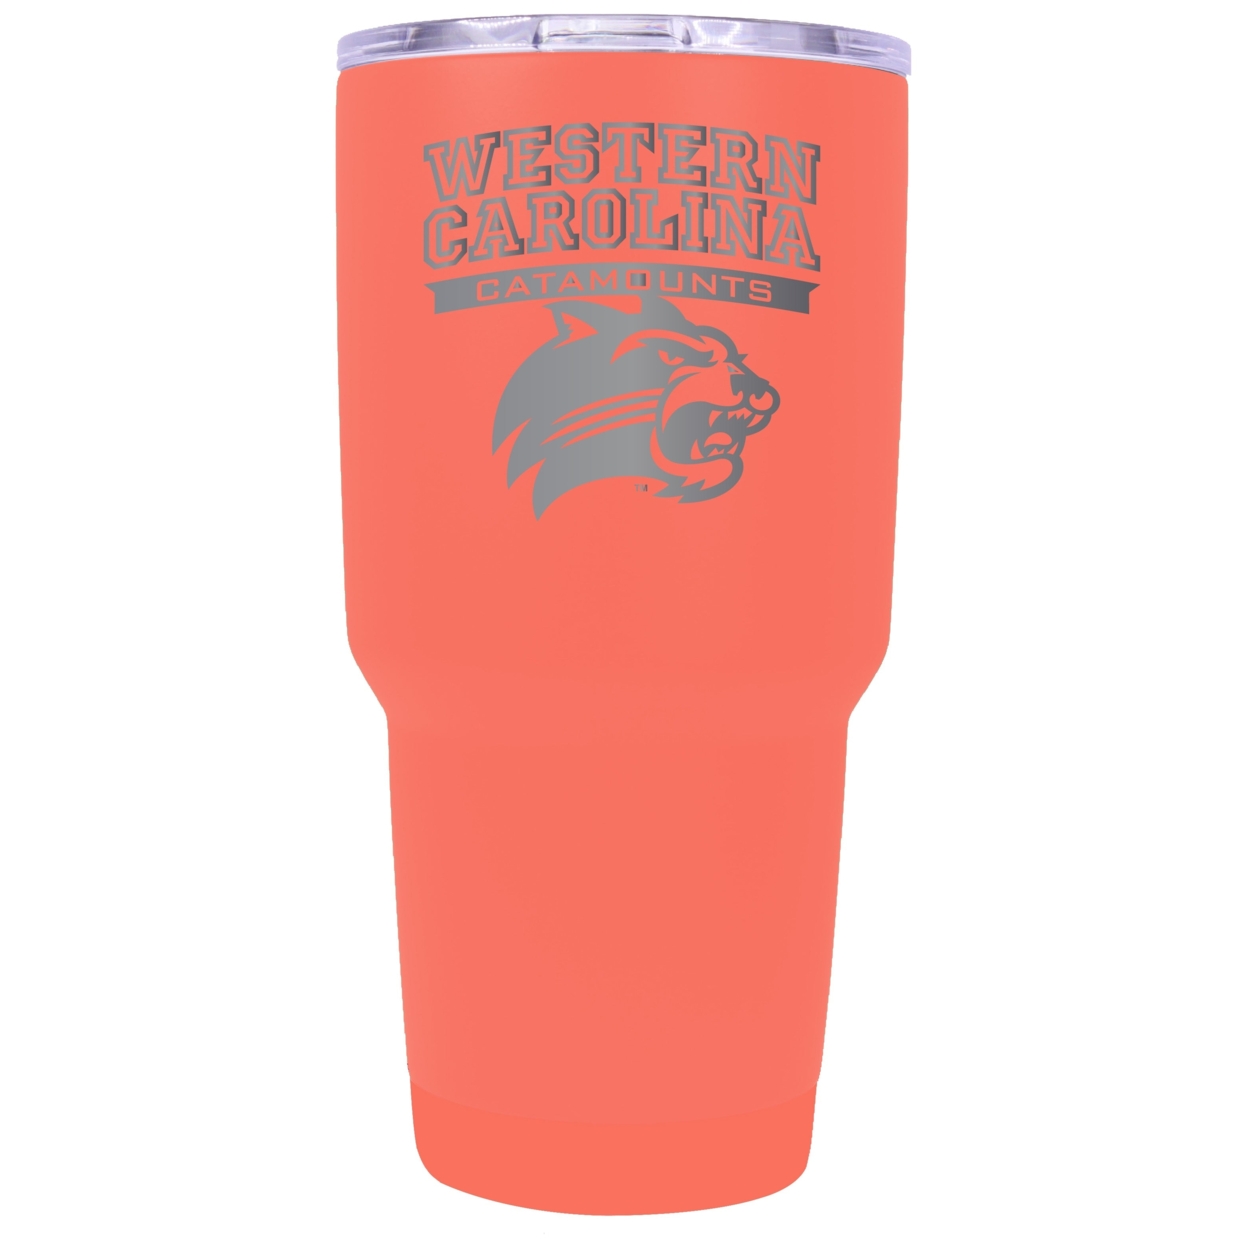 Western Carolina University 24 Oz Laser Engraved Stainless Steel Insulated Tumbler - Choose Your Color. - Coral